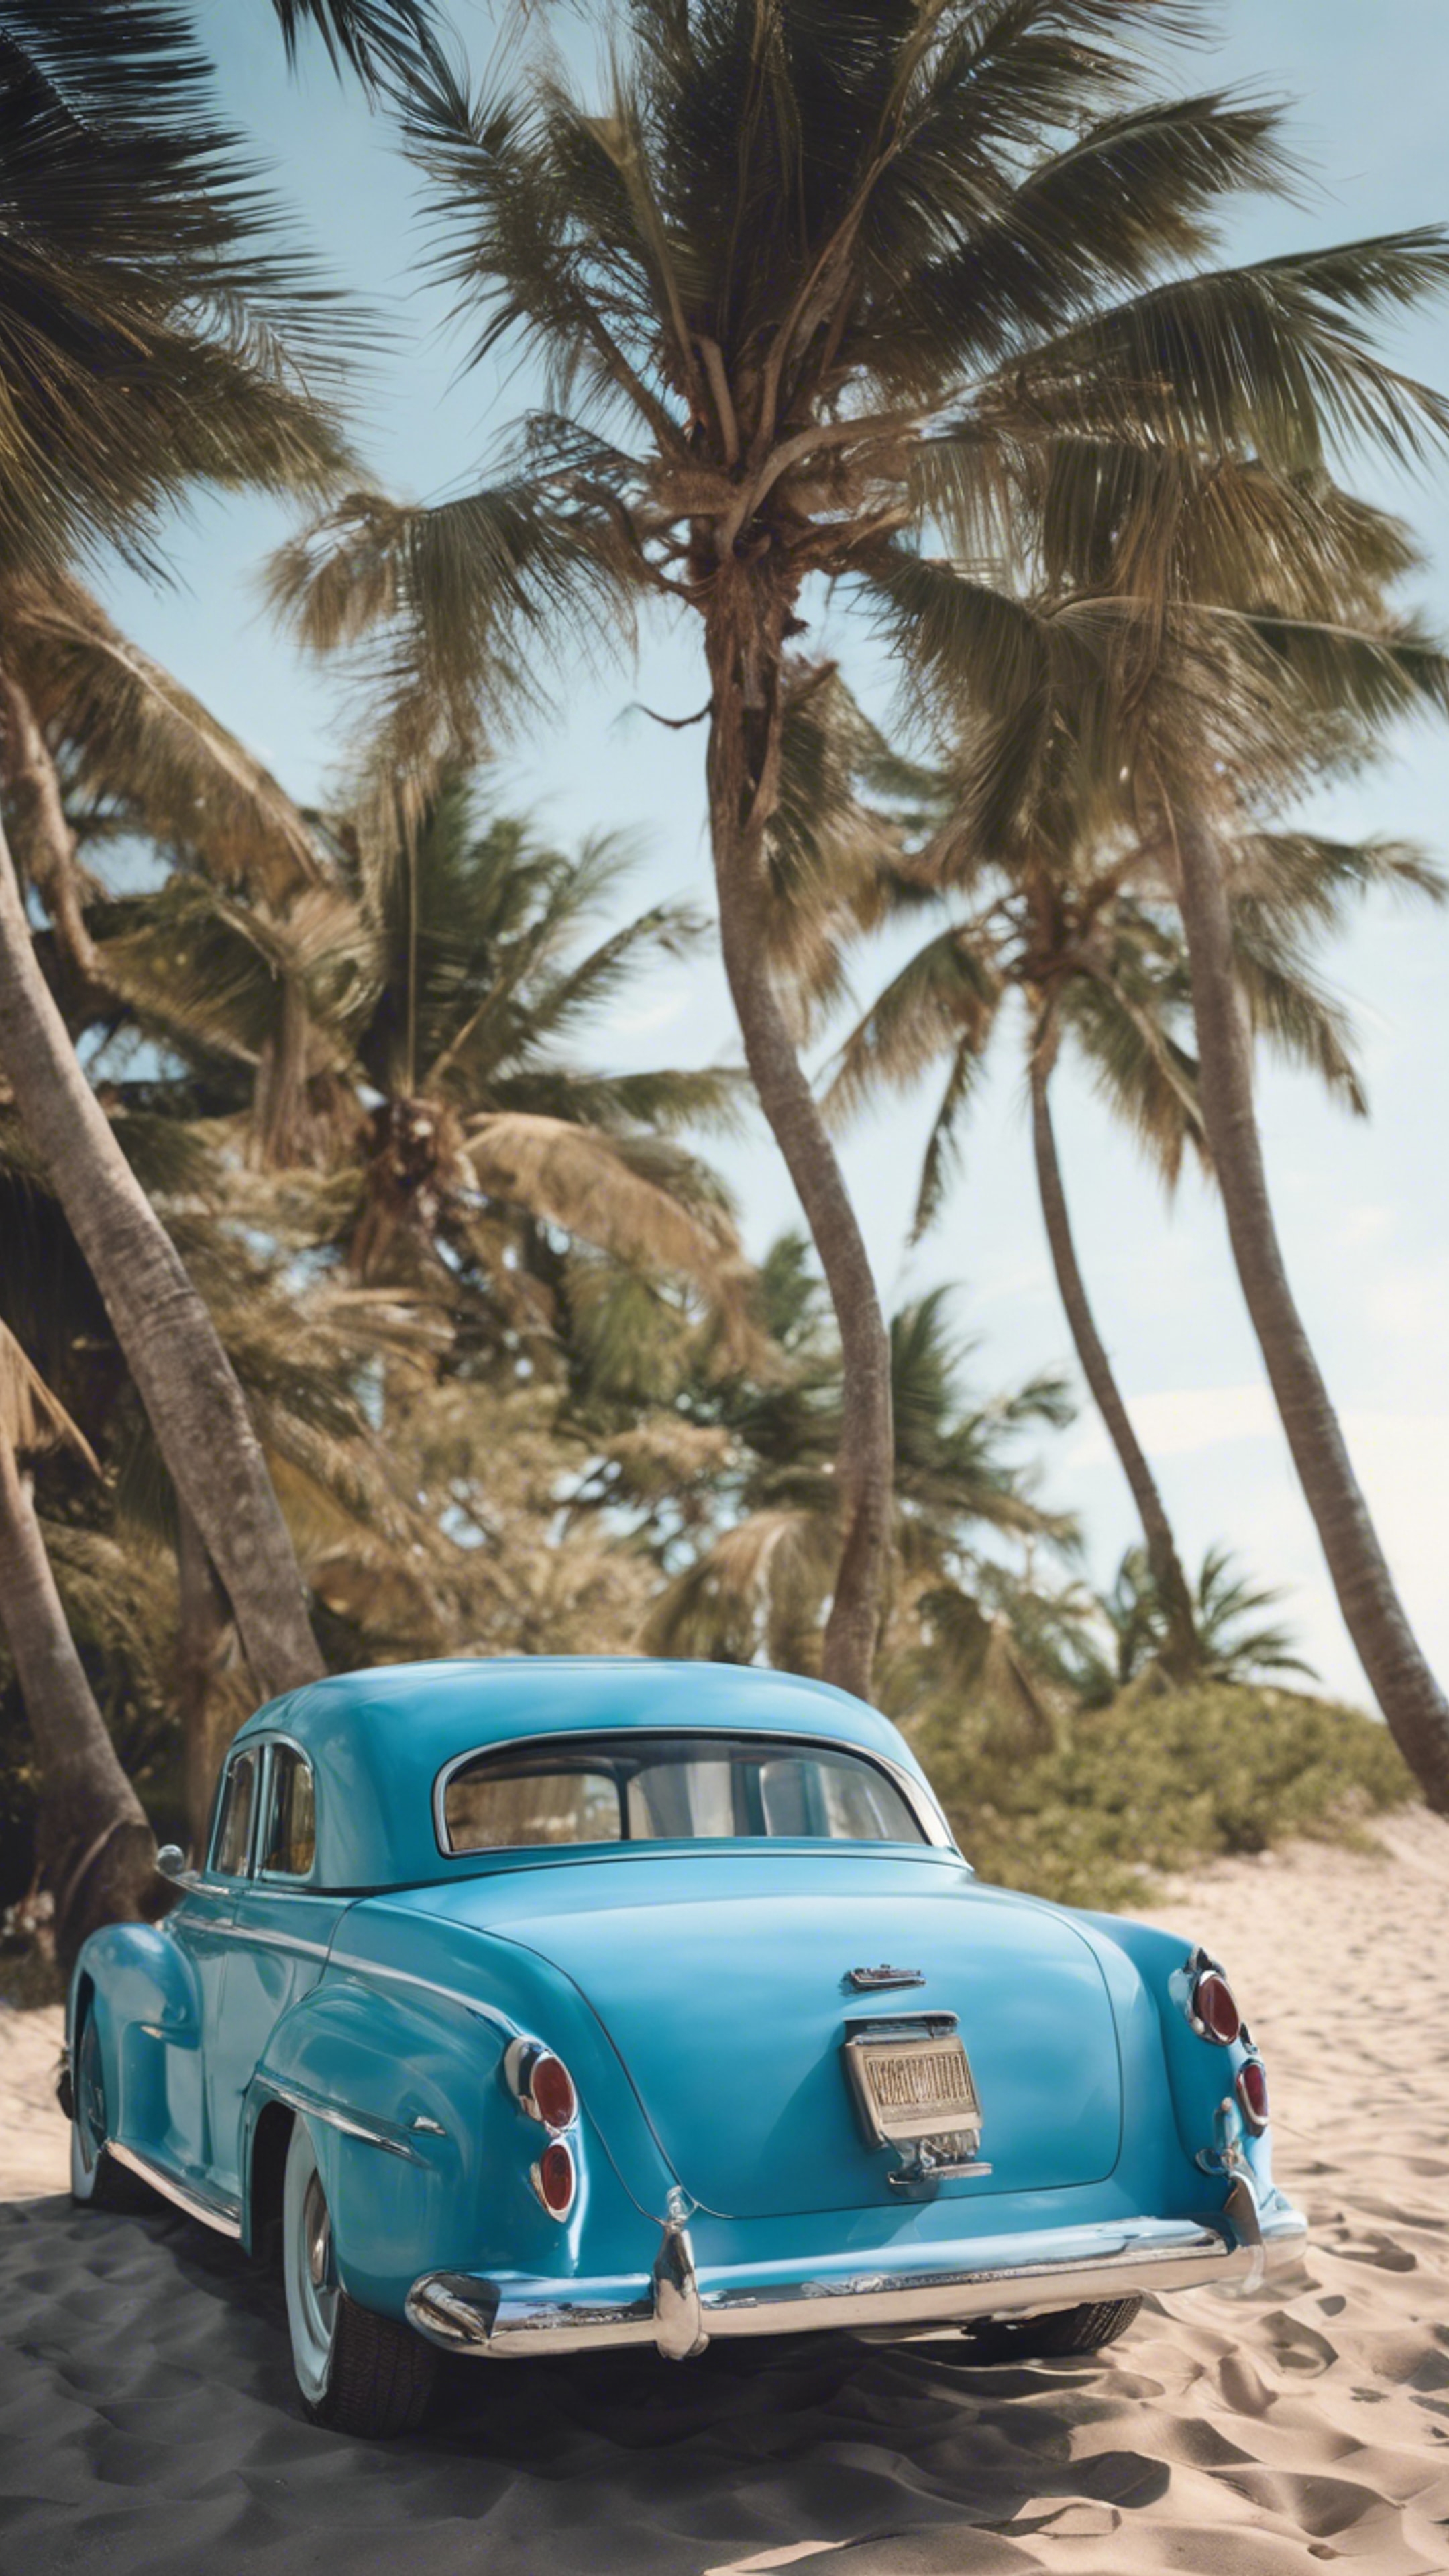 A vintage car painted in cool blue, parked by the beach Wallpaper[7559f4037ca44818afd1]